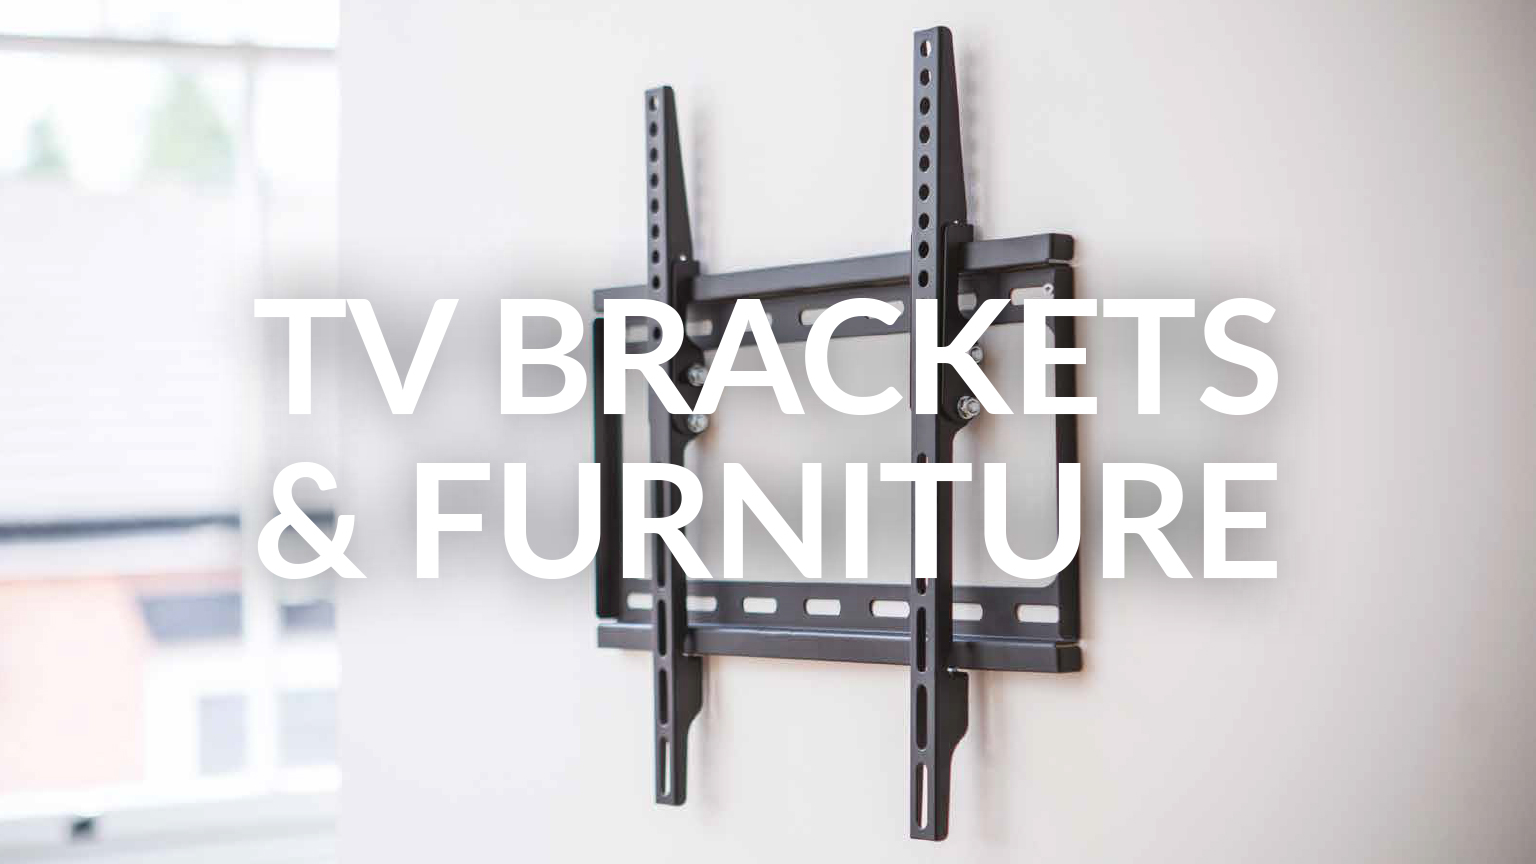 TV Brackets and Furniture